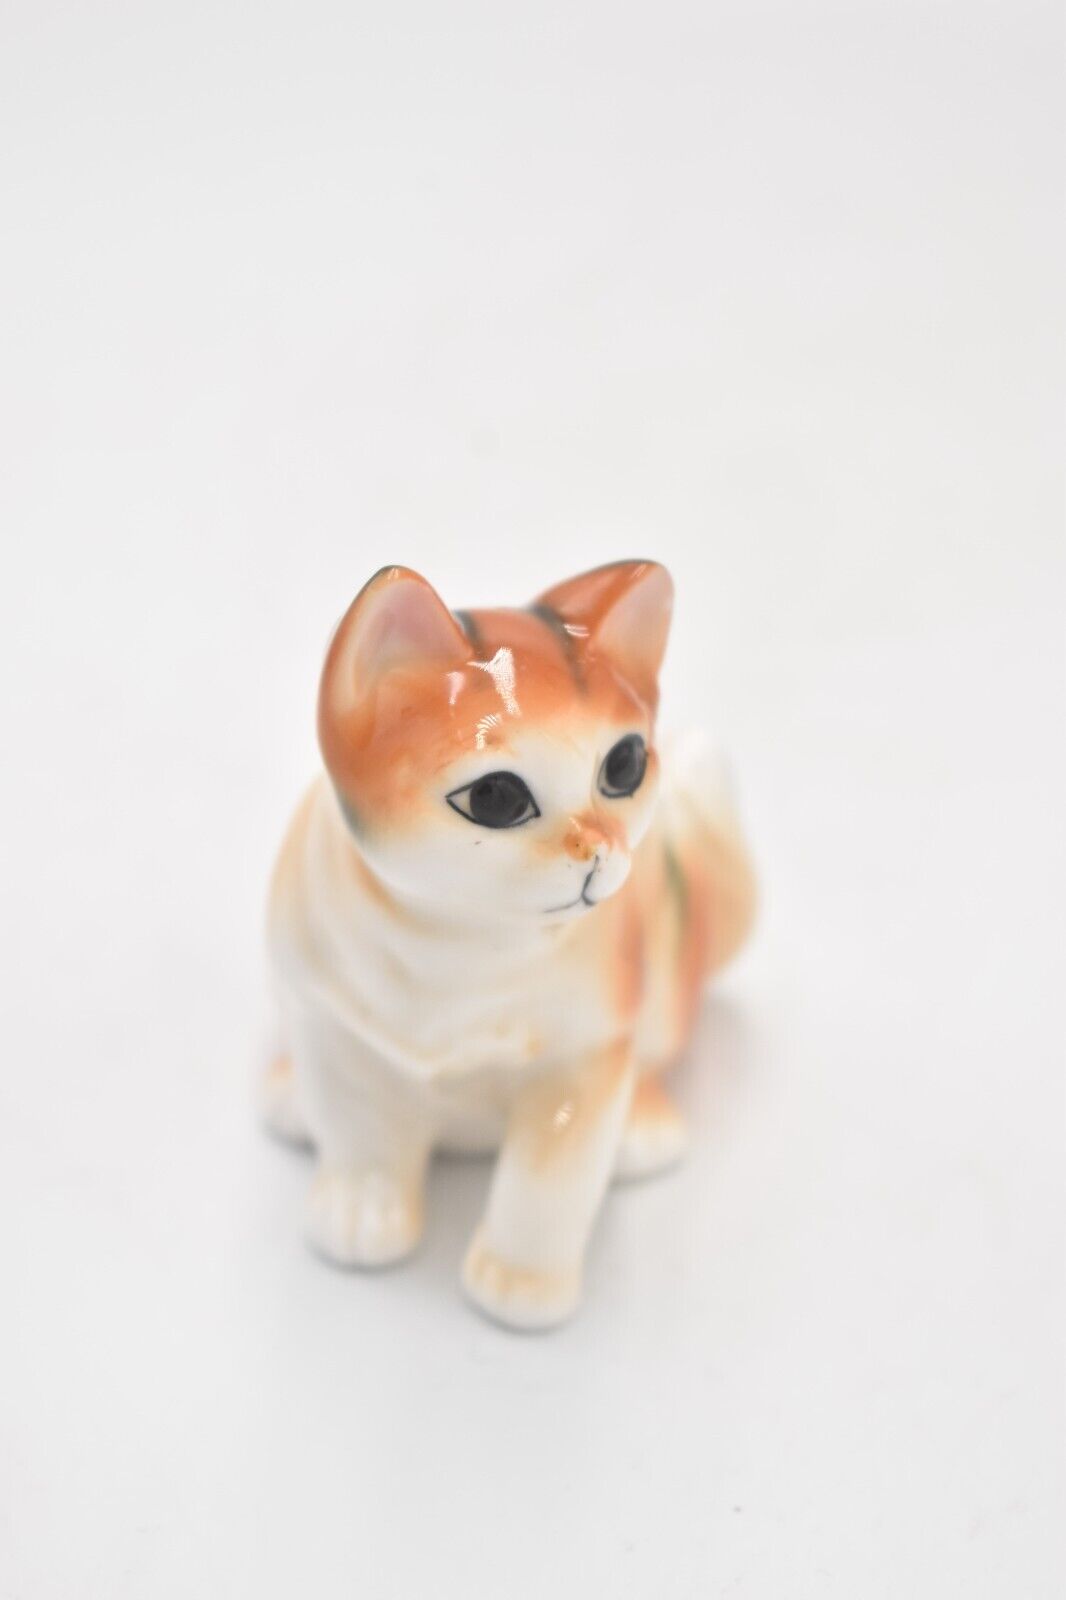 Vintage Cat and Kitten Figurine Statue Ornament – Collectible Pawn